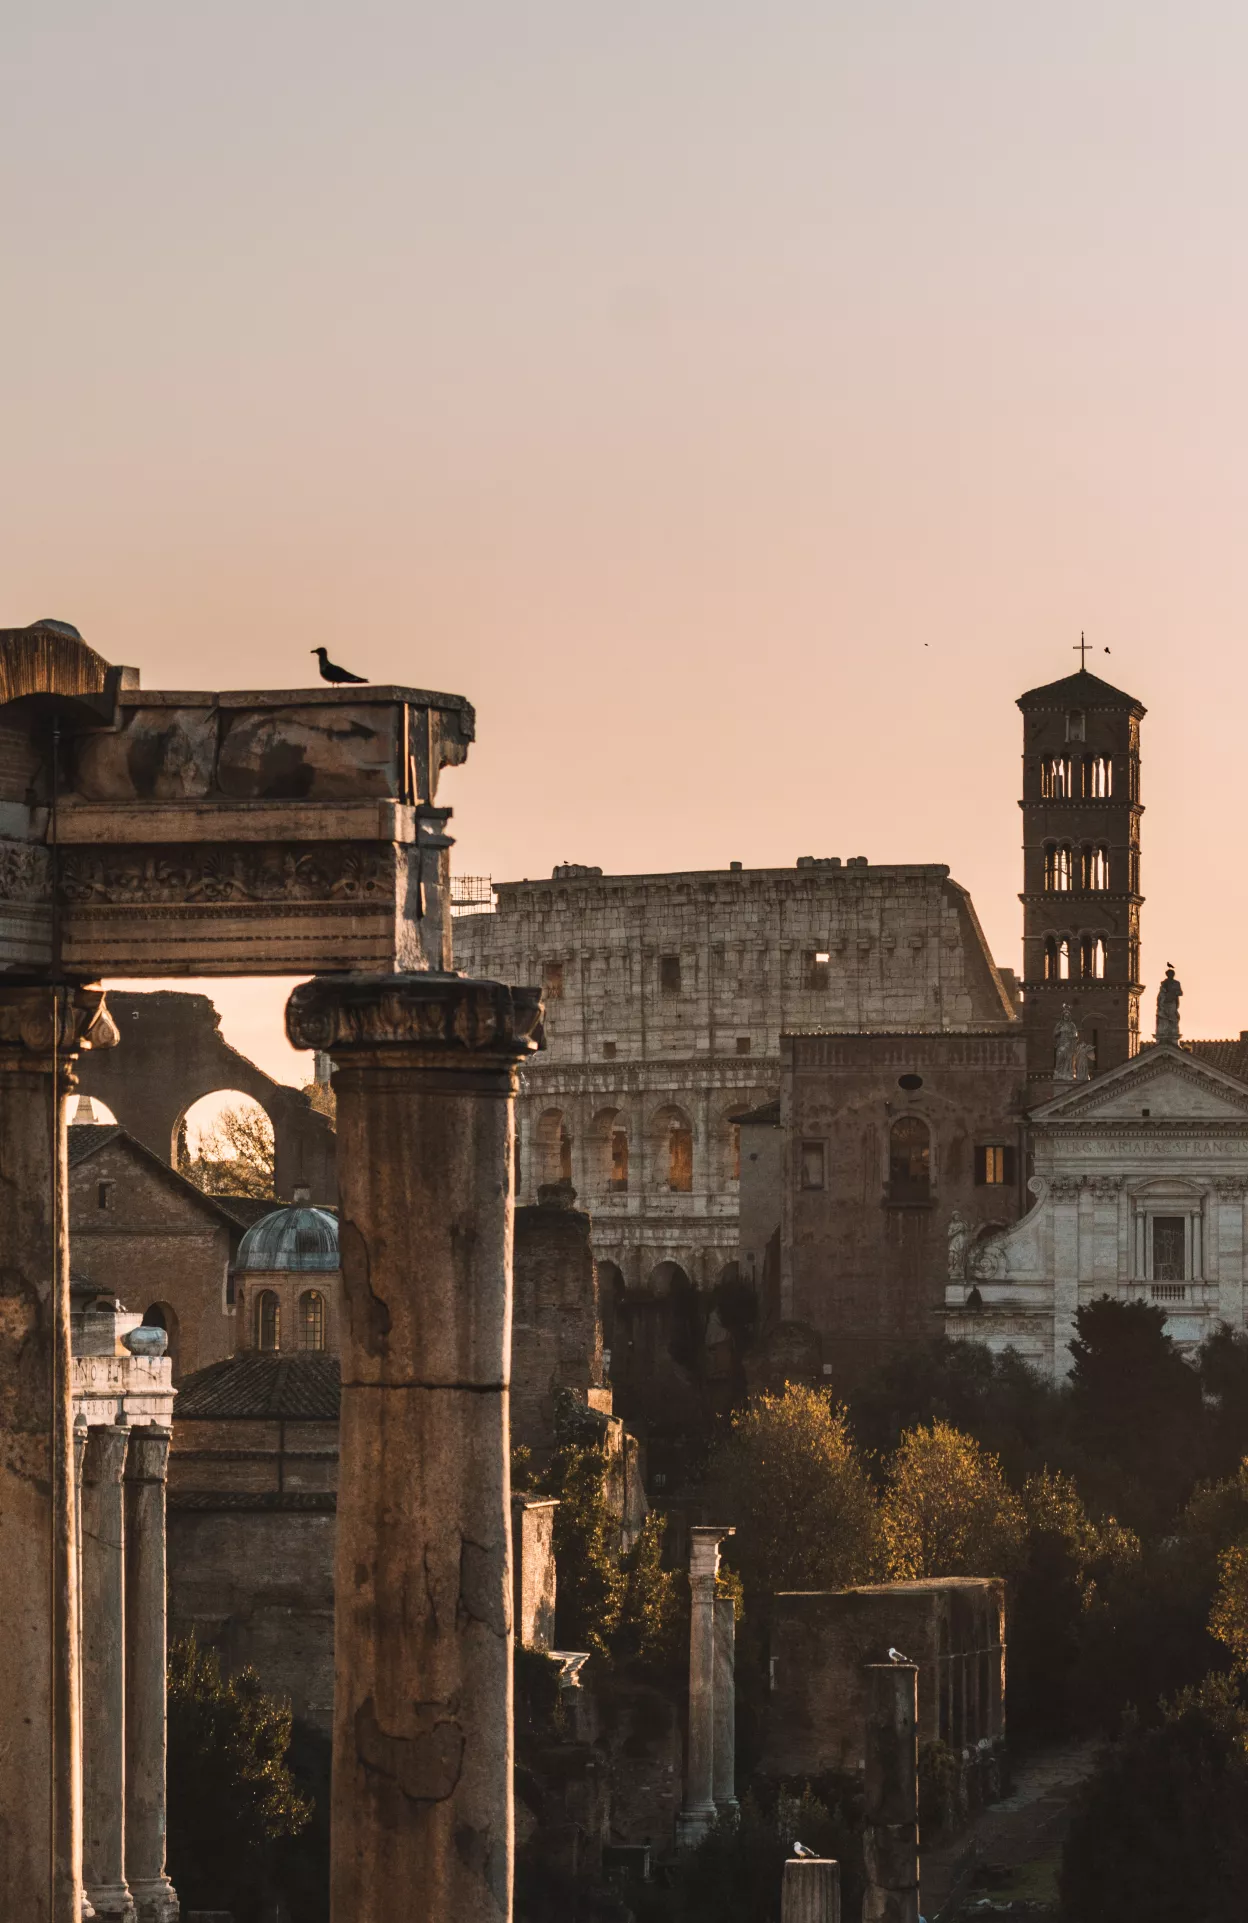 Evening shot of the Forum in Rome